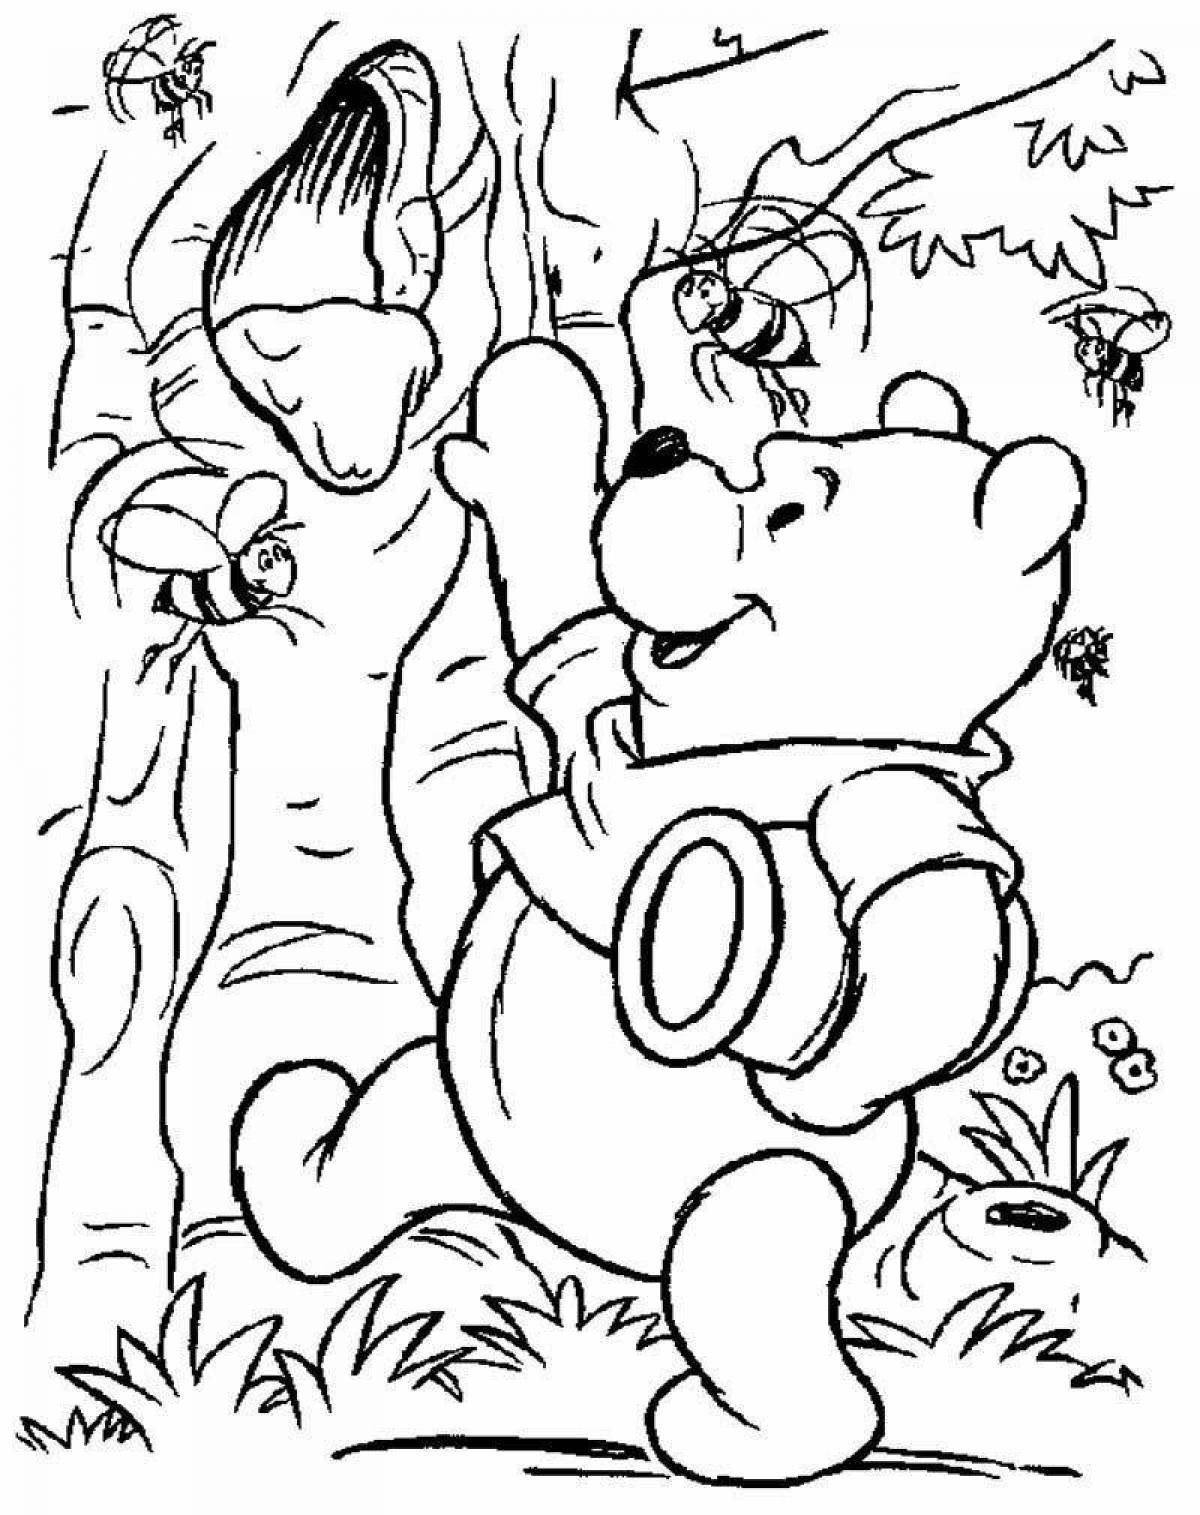 Fabulous winnie the pooh and his friends coloring page